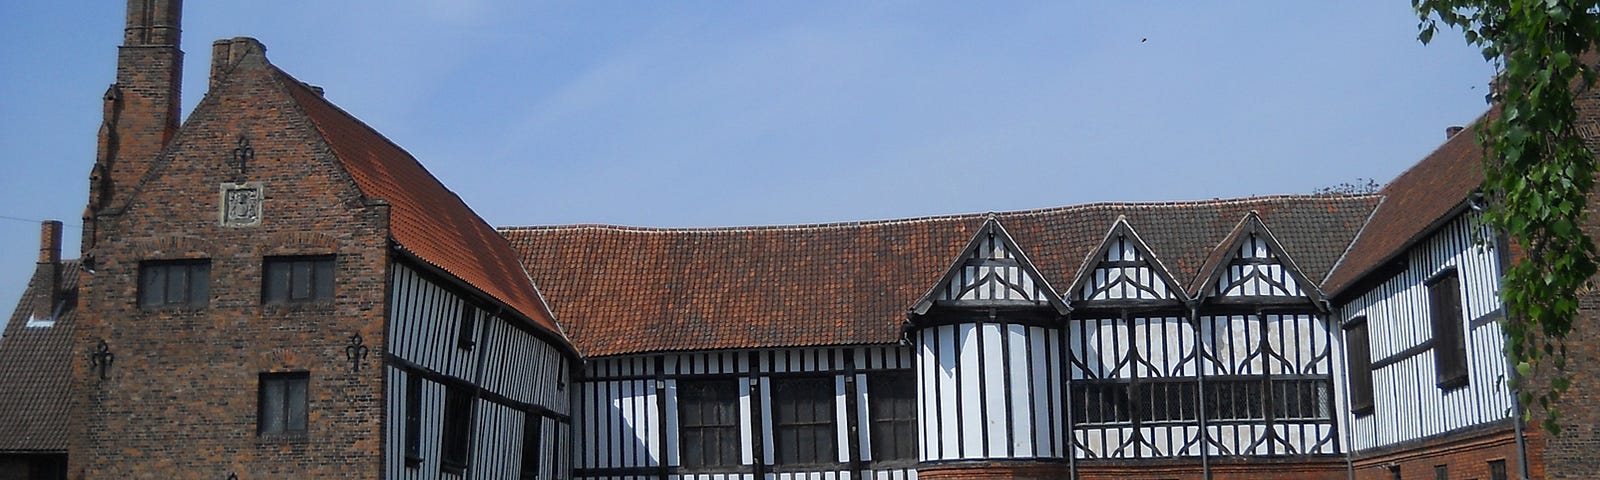 Horse-shoe shaped Gainsborough Old Hall, built 1460, in red brick and black lath & white-washed plaster.